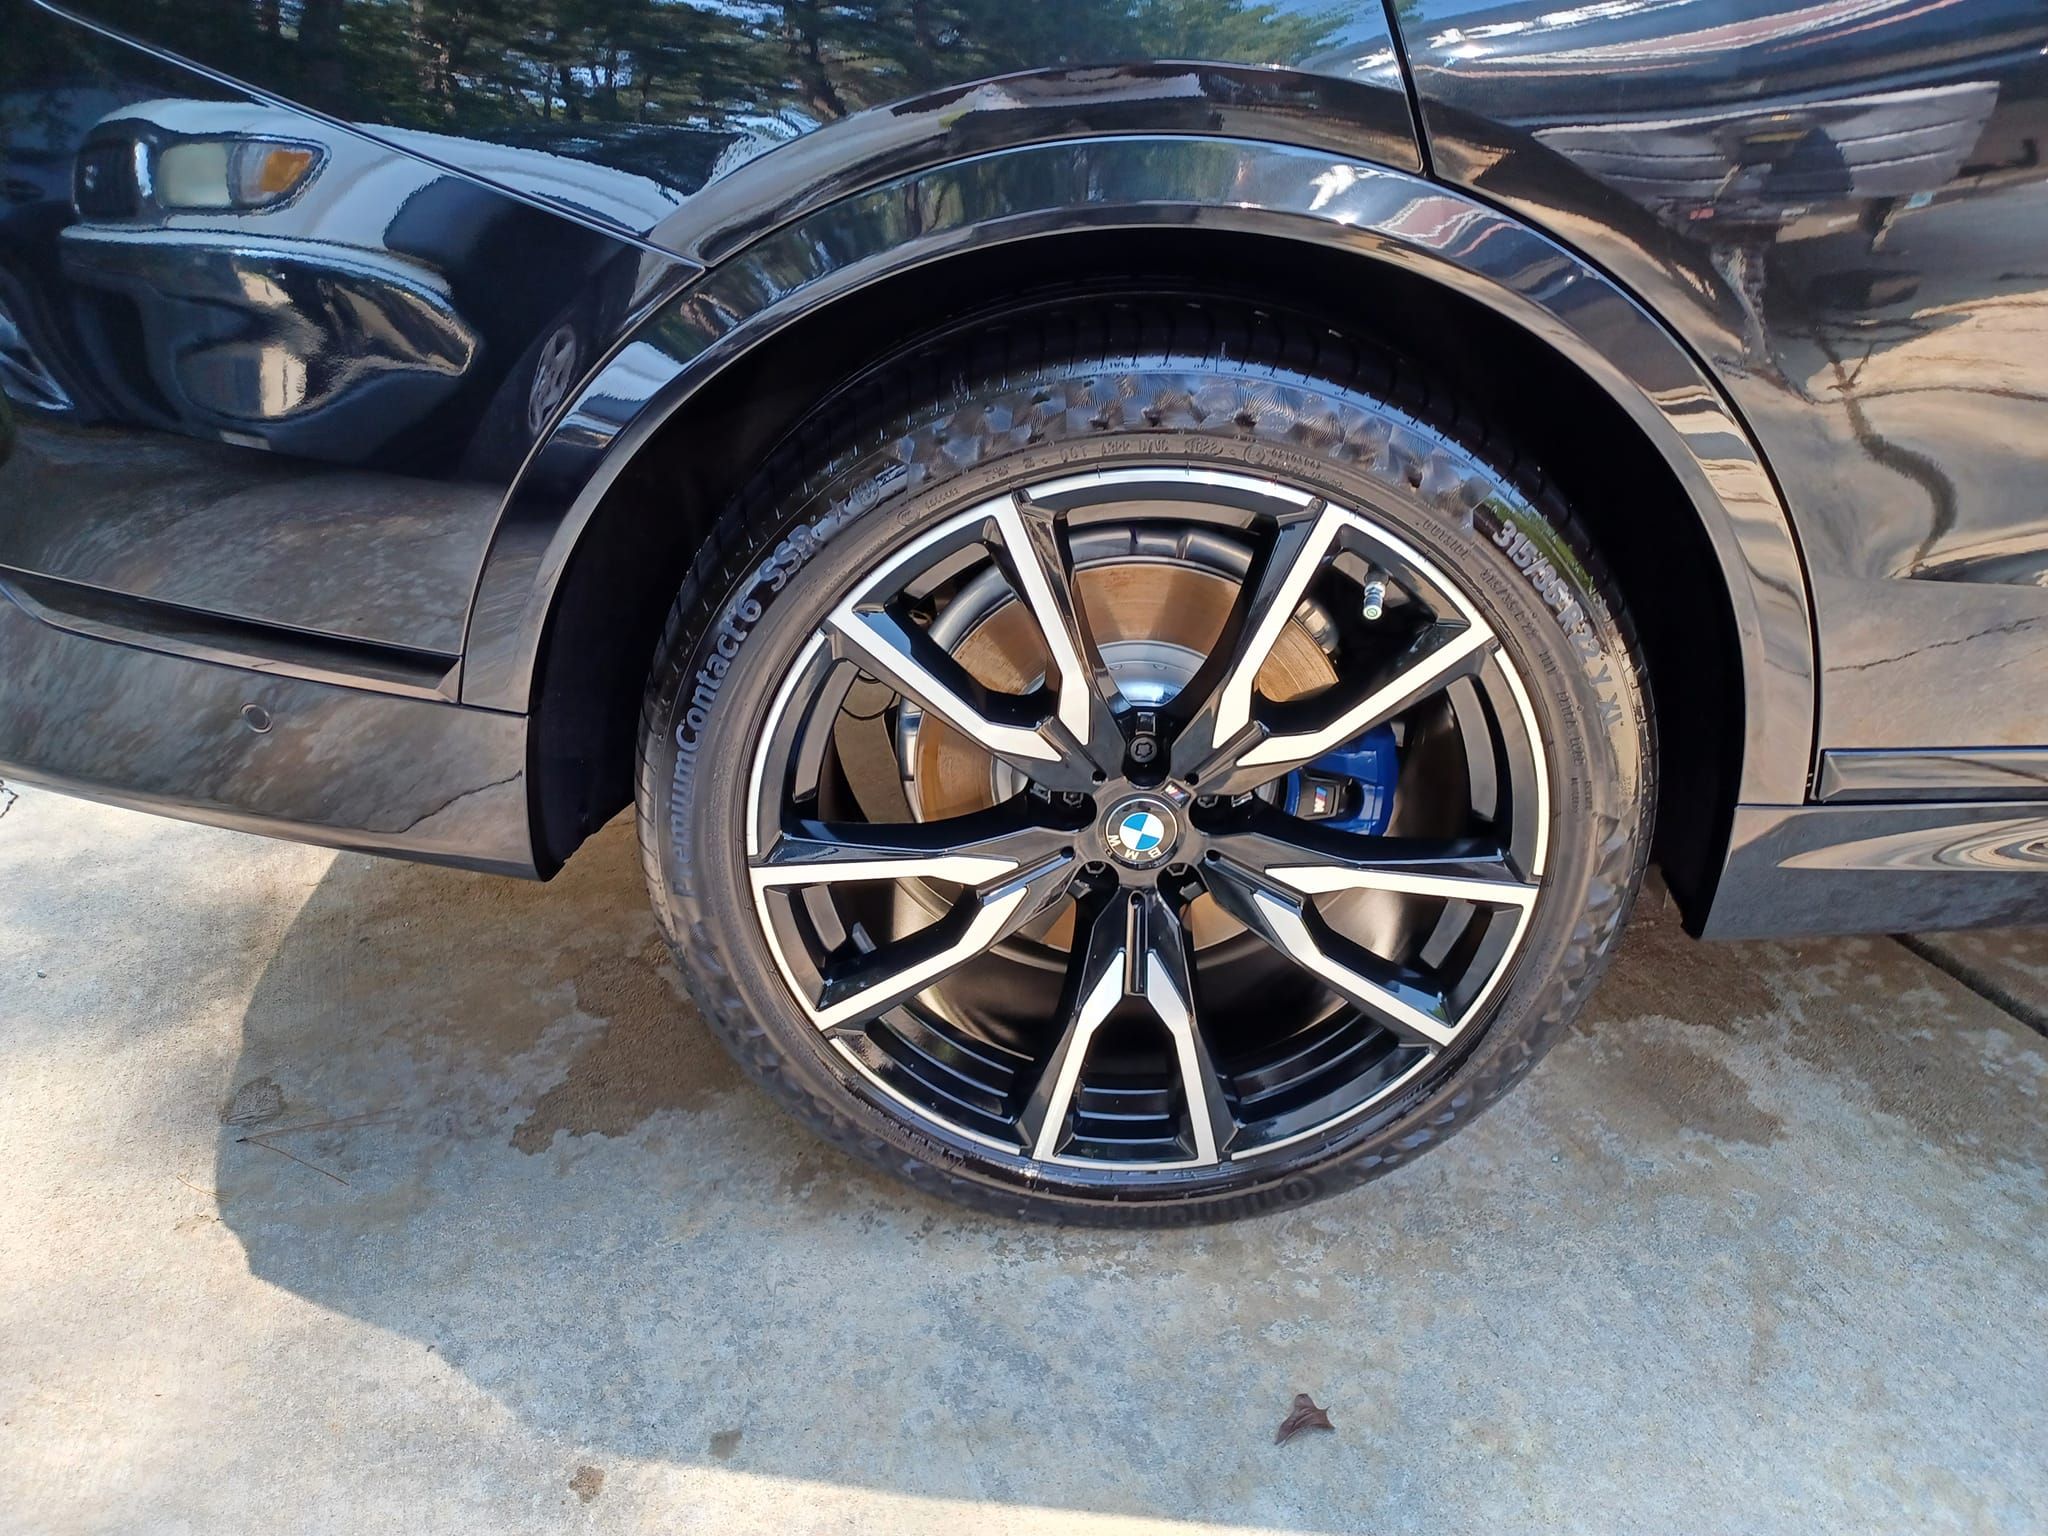 Detailing for RH Strictly Business Auto Detailing and Pressure Washing in Warner Robins, GA